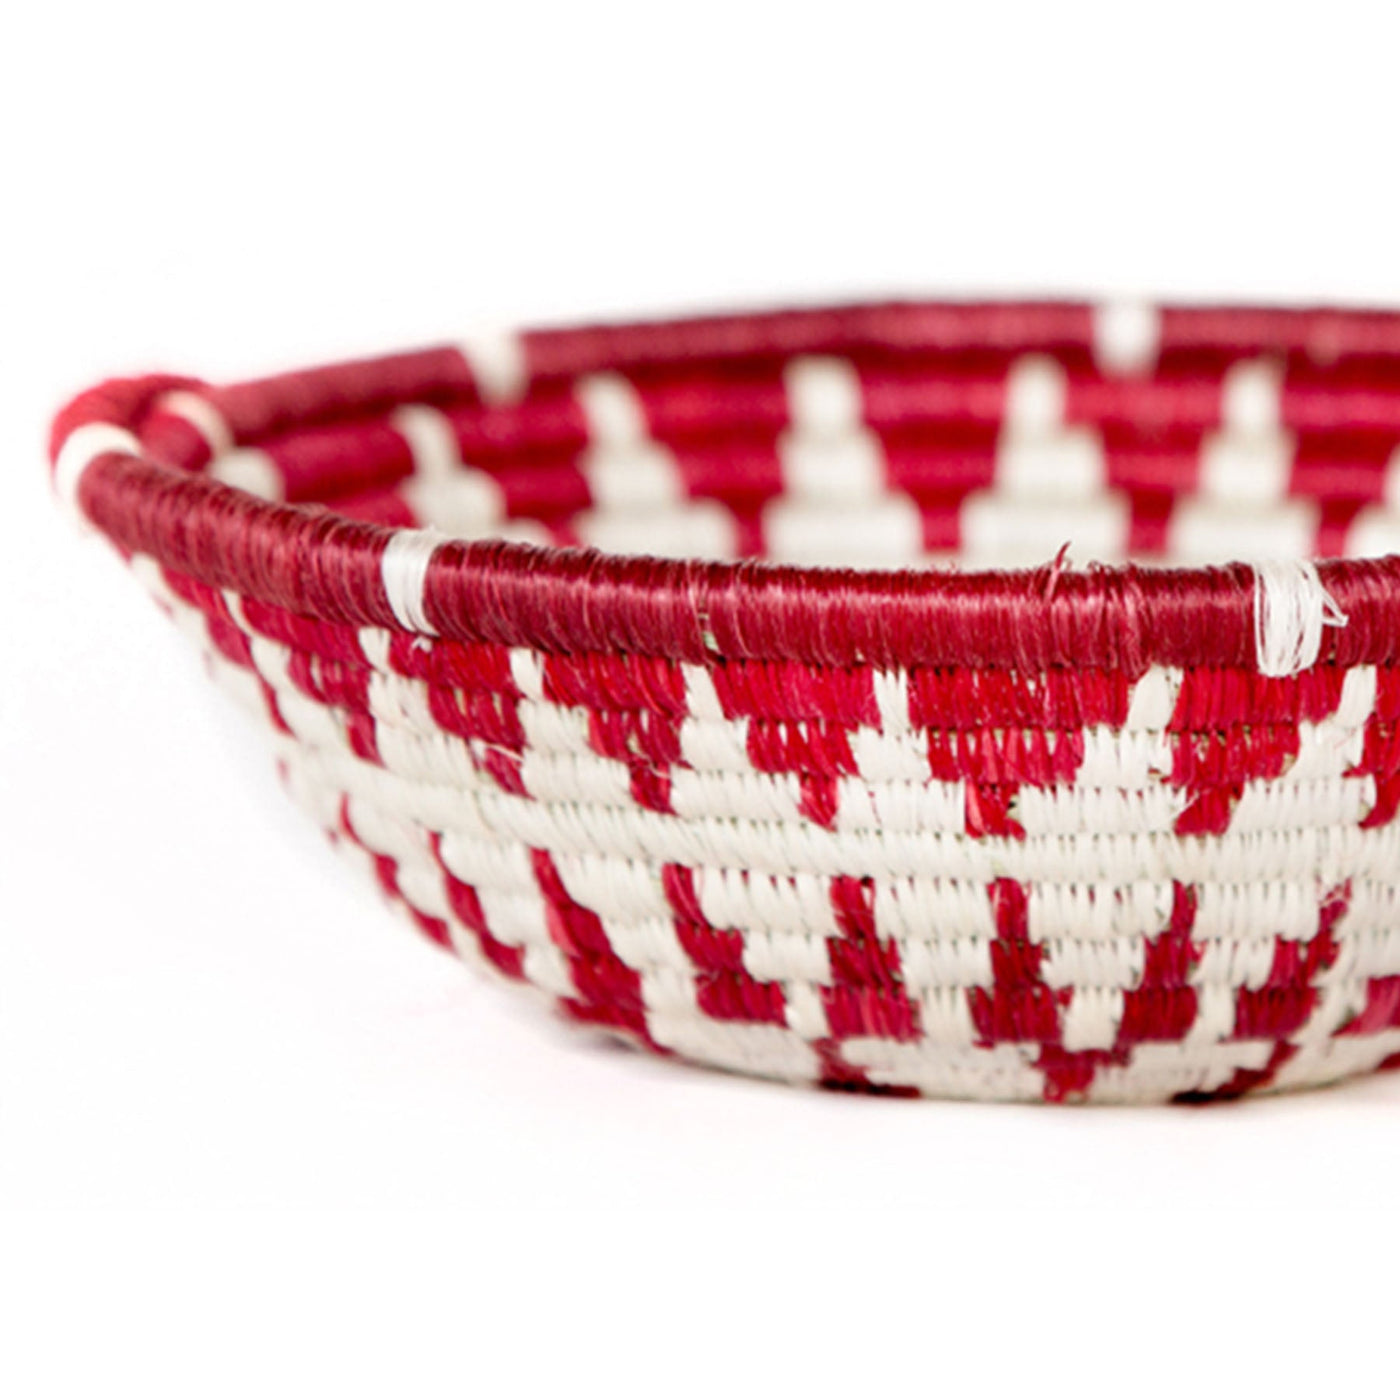 Small Fiery Red Intore Bowl